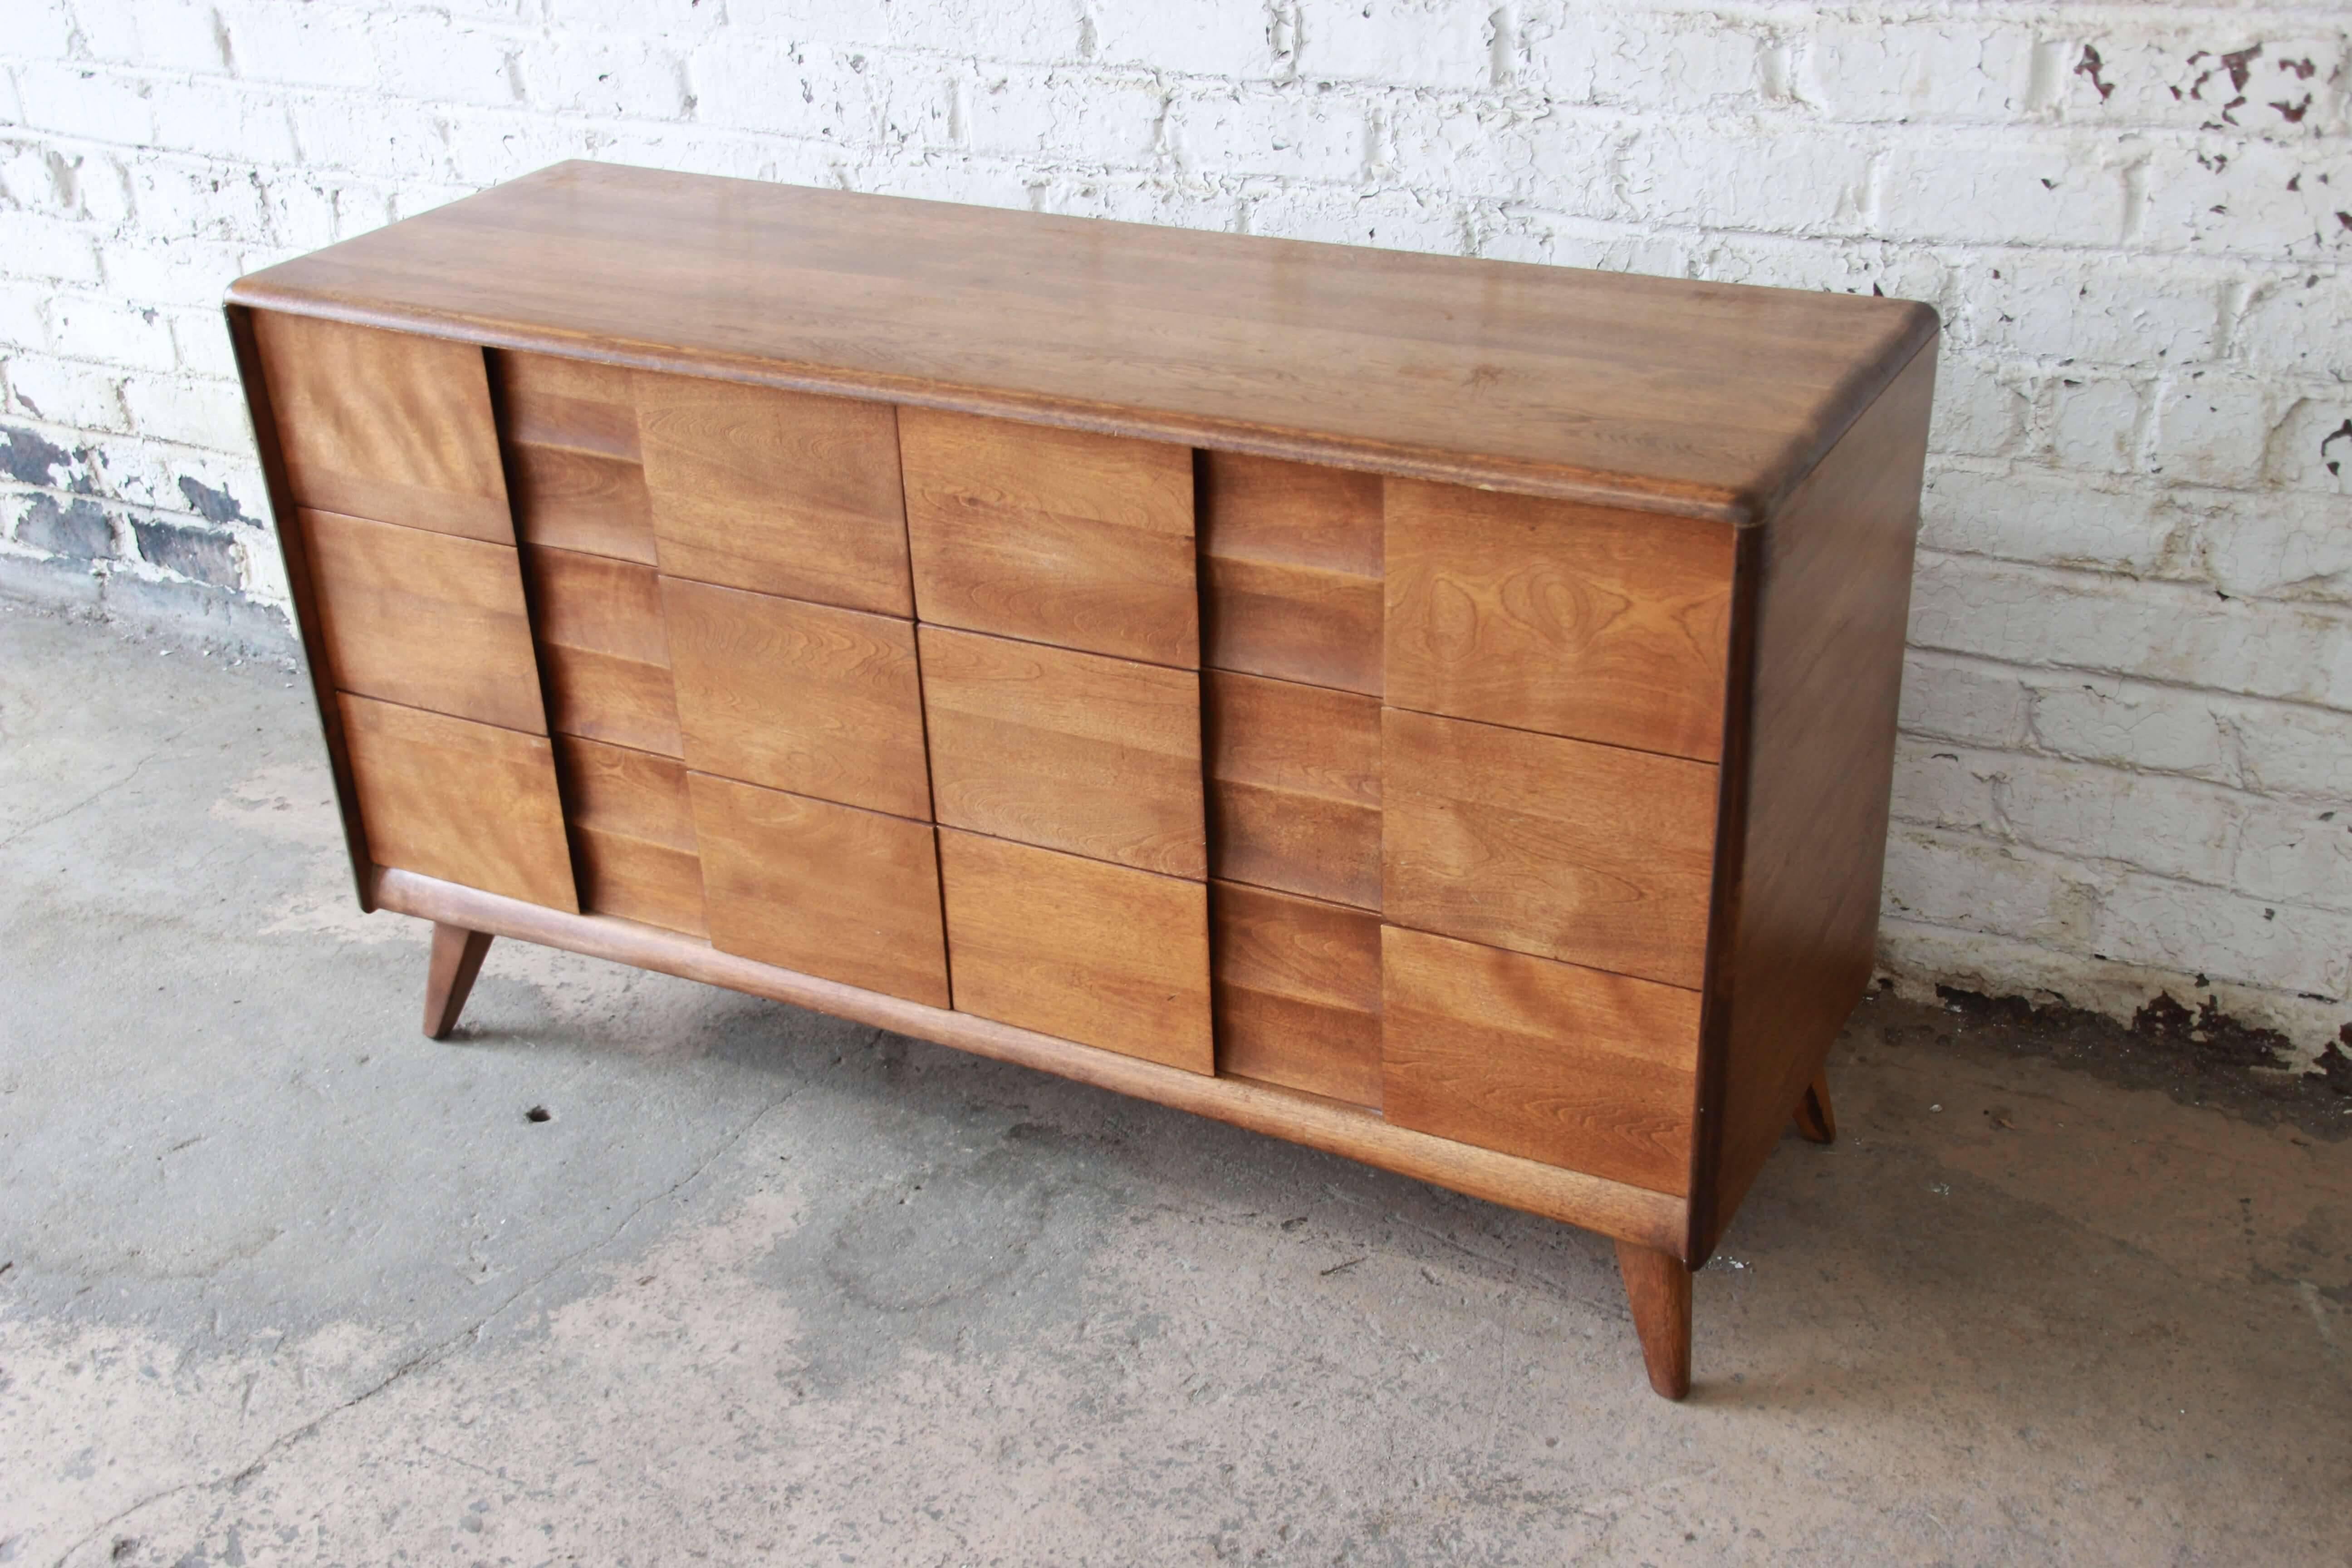 Offering a very nice six-drawer Heywood-Wakefield dresser in Wheat. The dresser has unique sculpted pulls and midcentury details. Each of the drawers open and close smoothly while providing ample roam for storage. It has nice tapered modern legs and